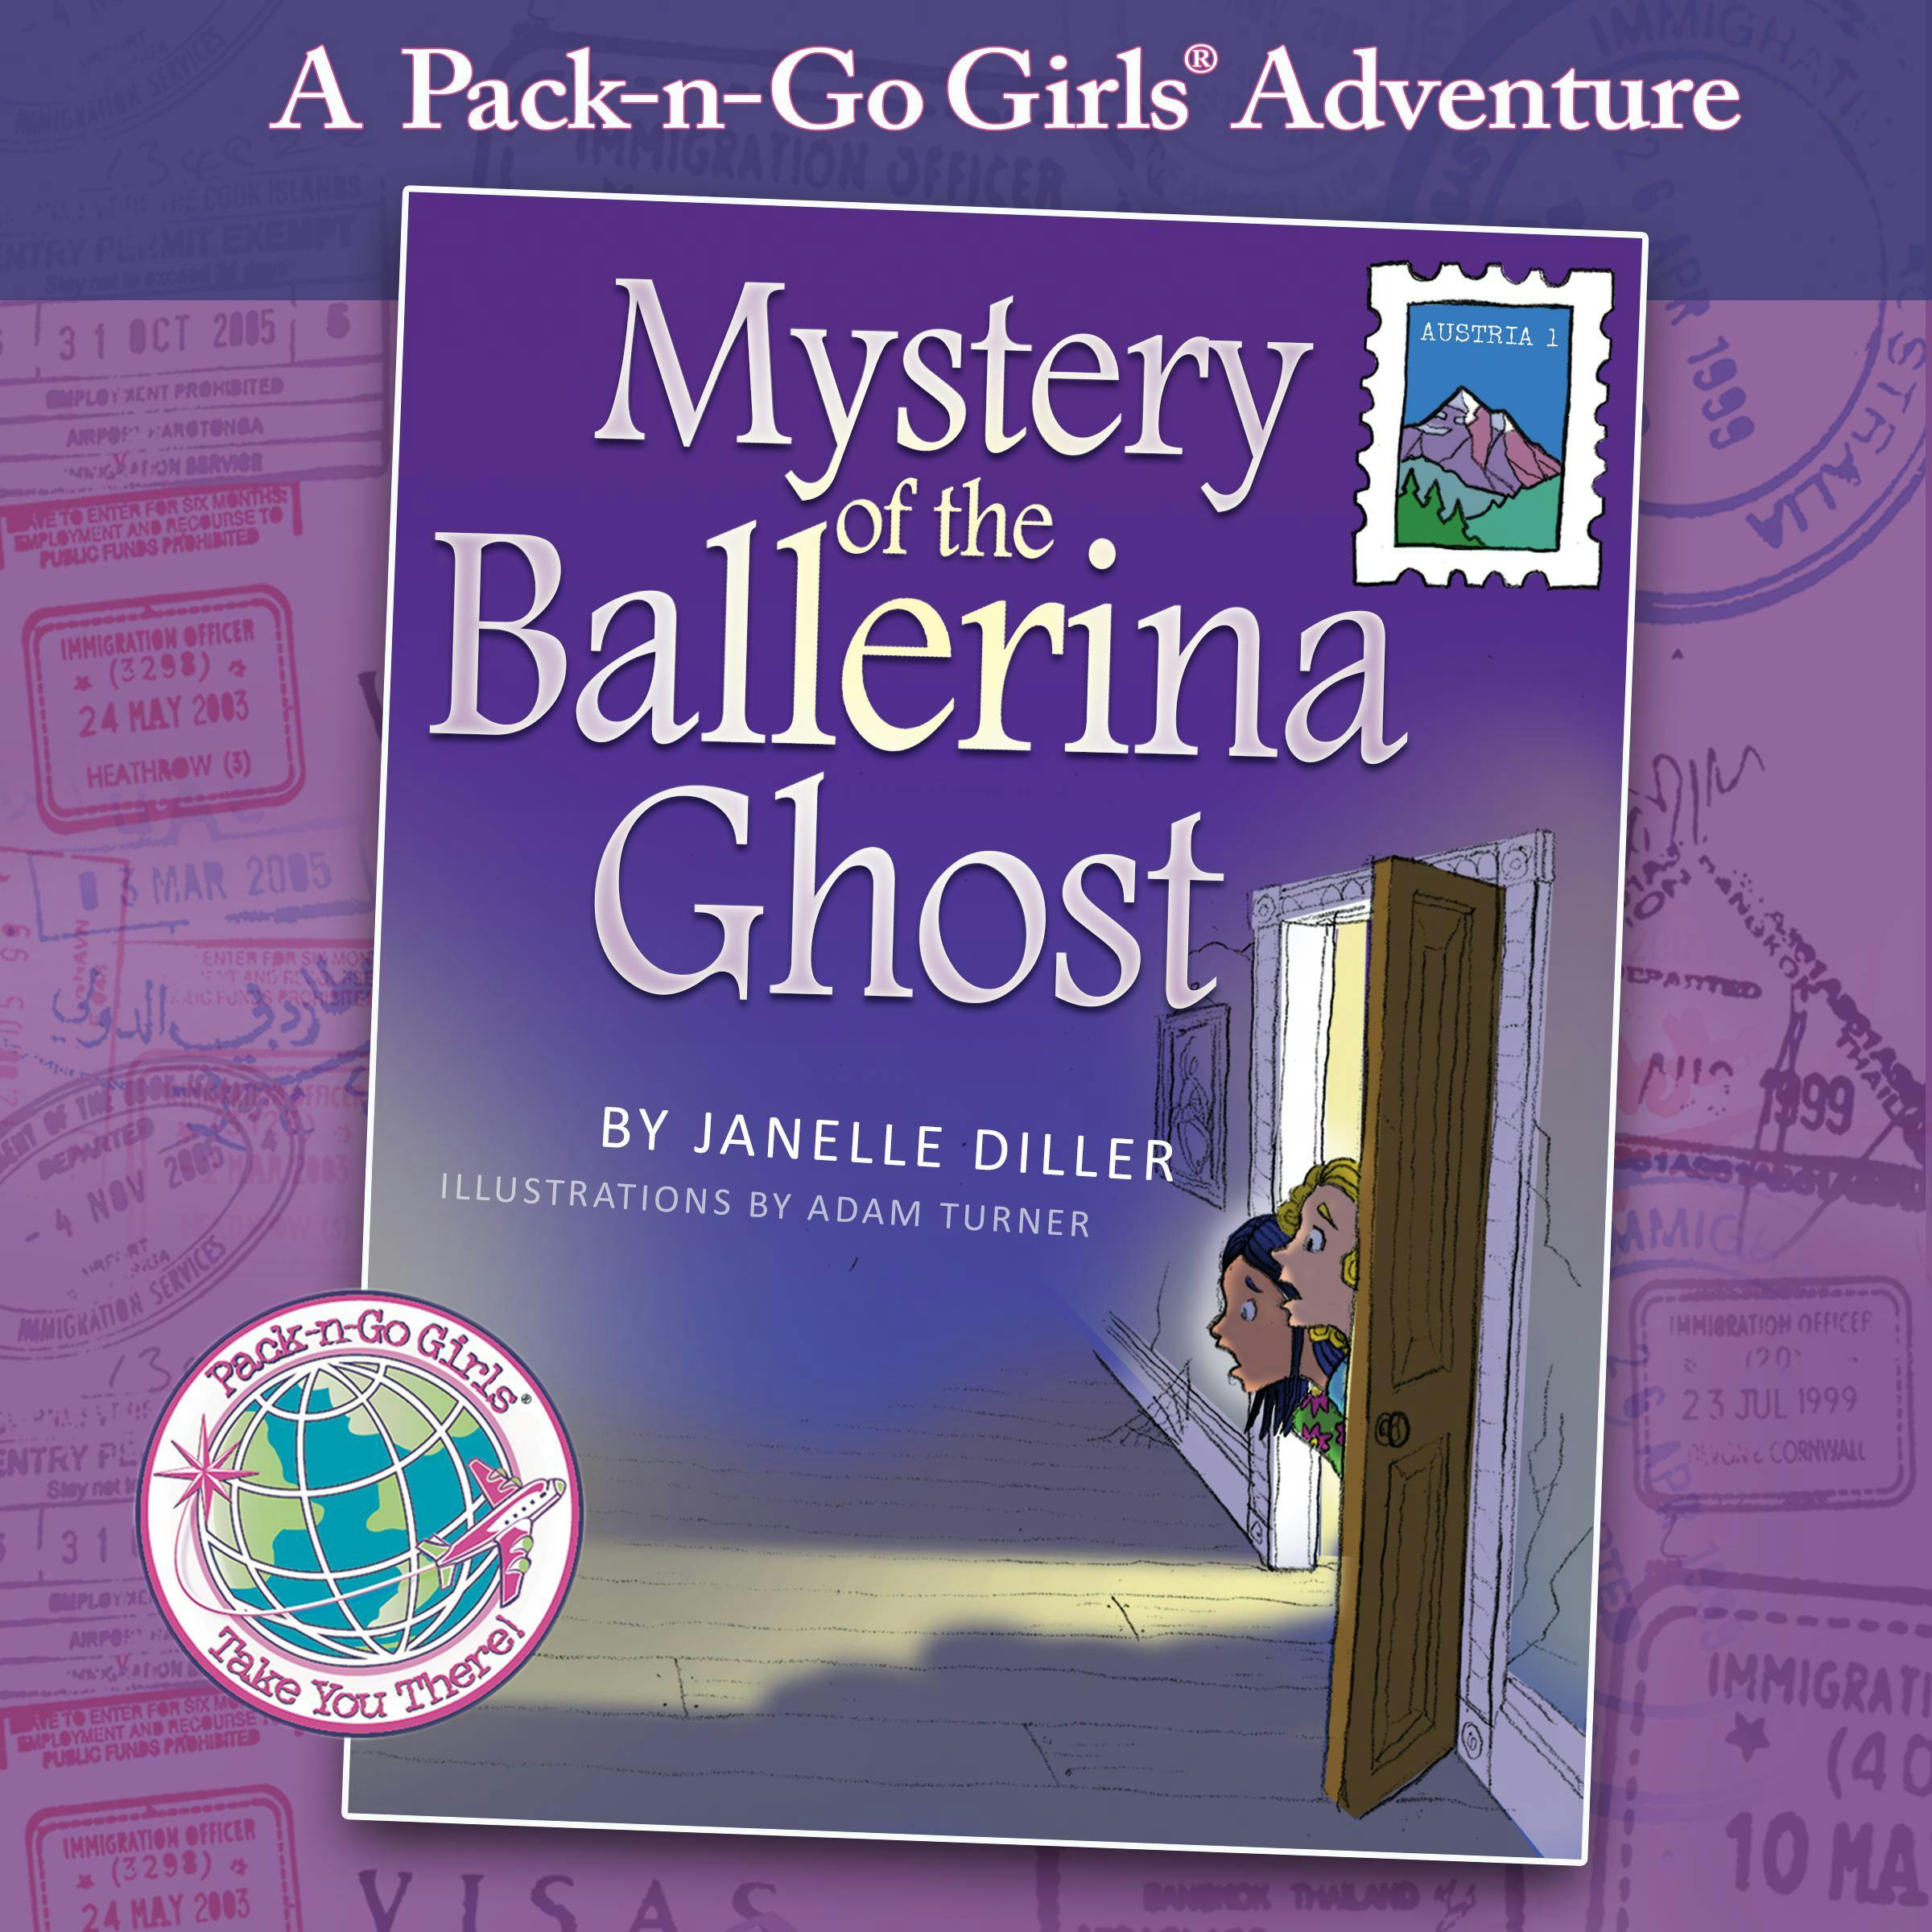 Mystery of the Ballerina Ghost: Austria 1 - undefined